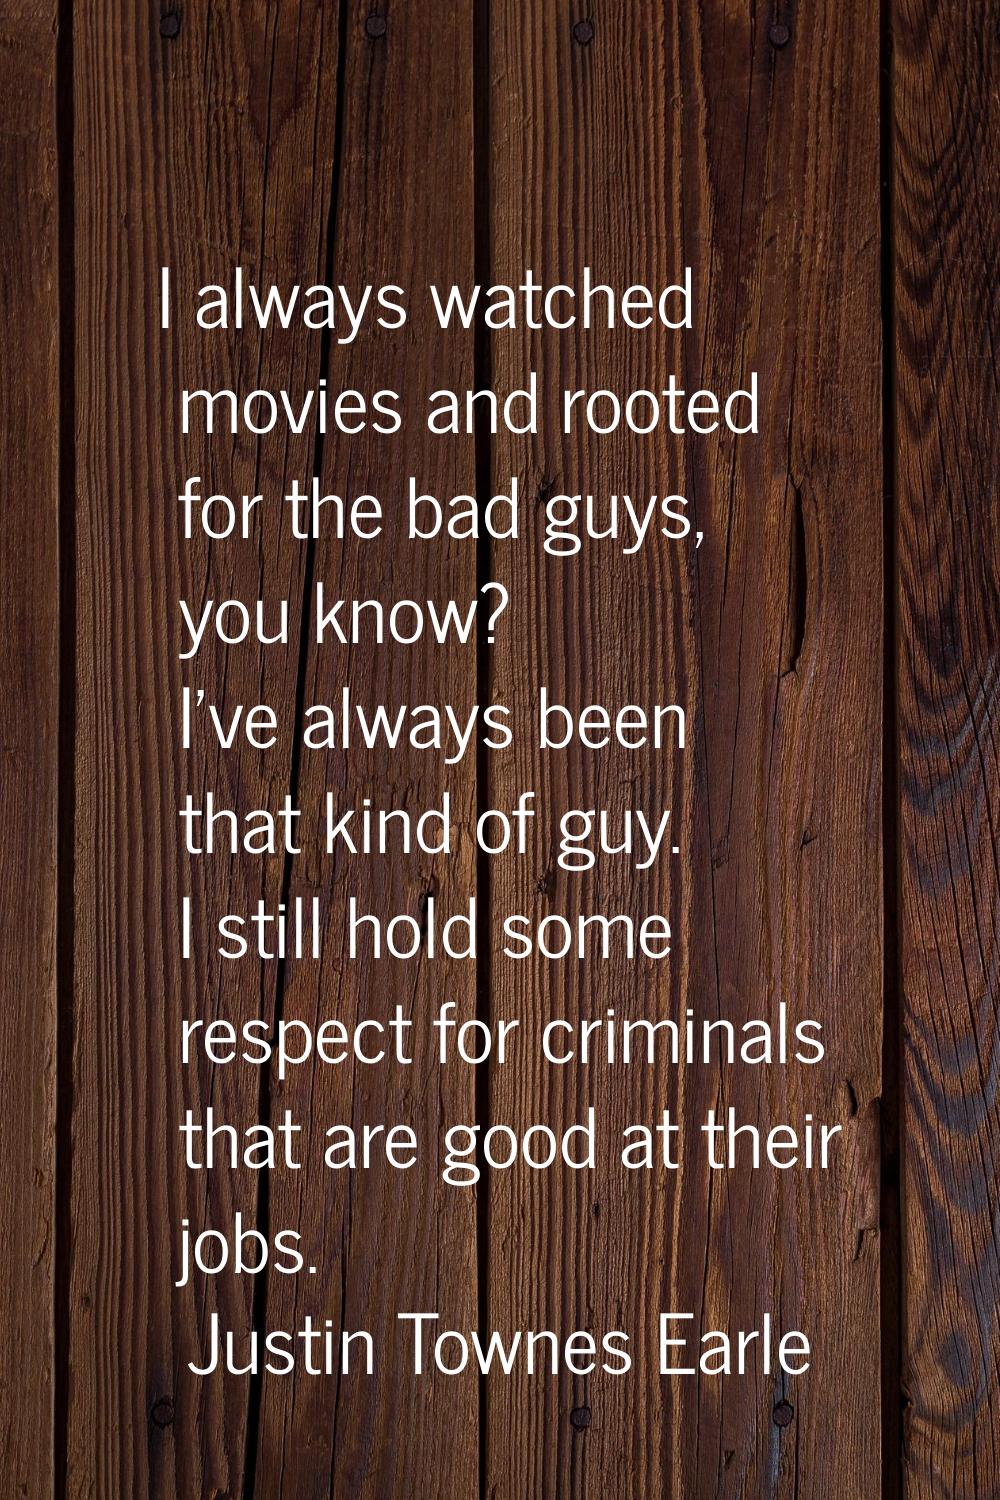 I always watched movies and rooted for the bad guys, you know? I've always been that kind of guy. I